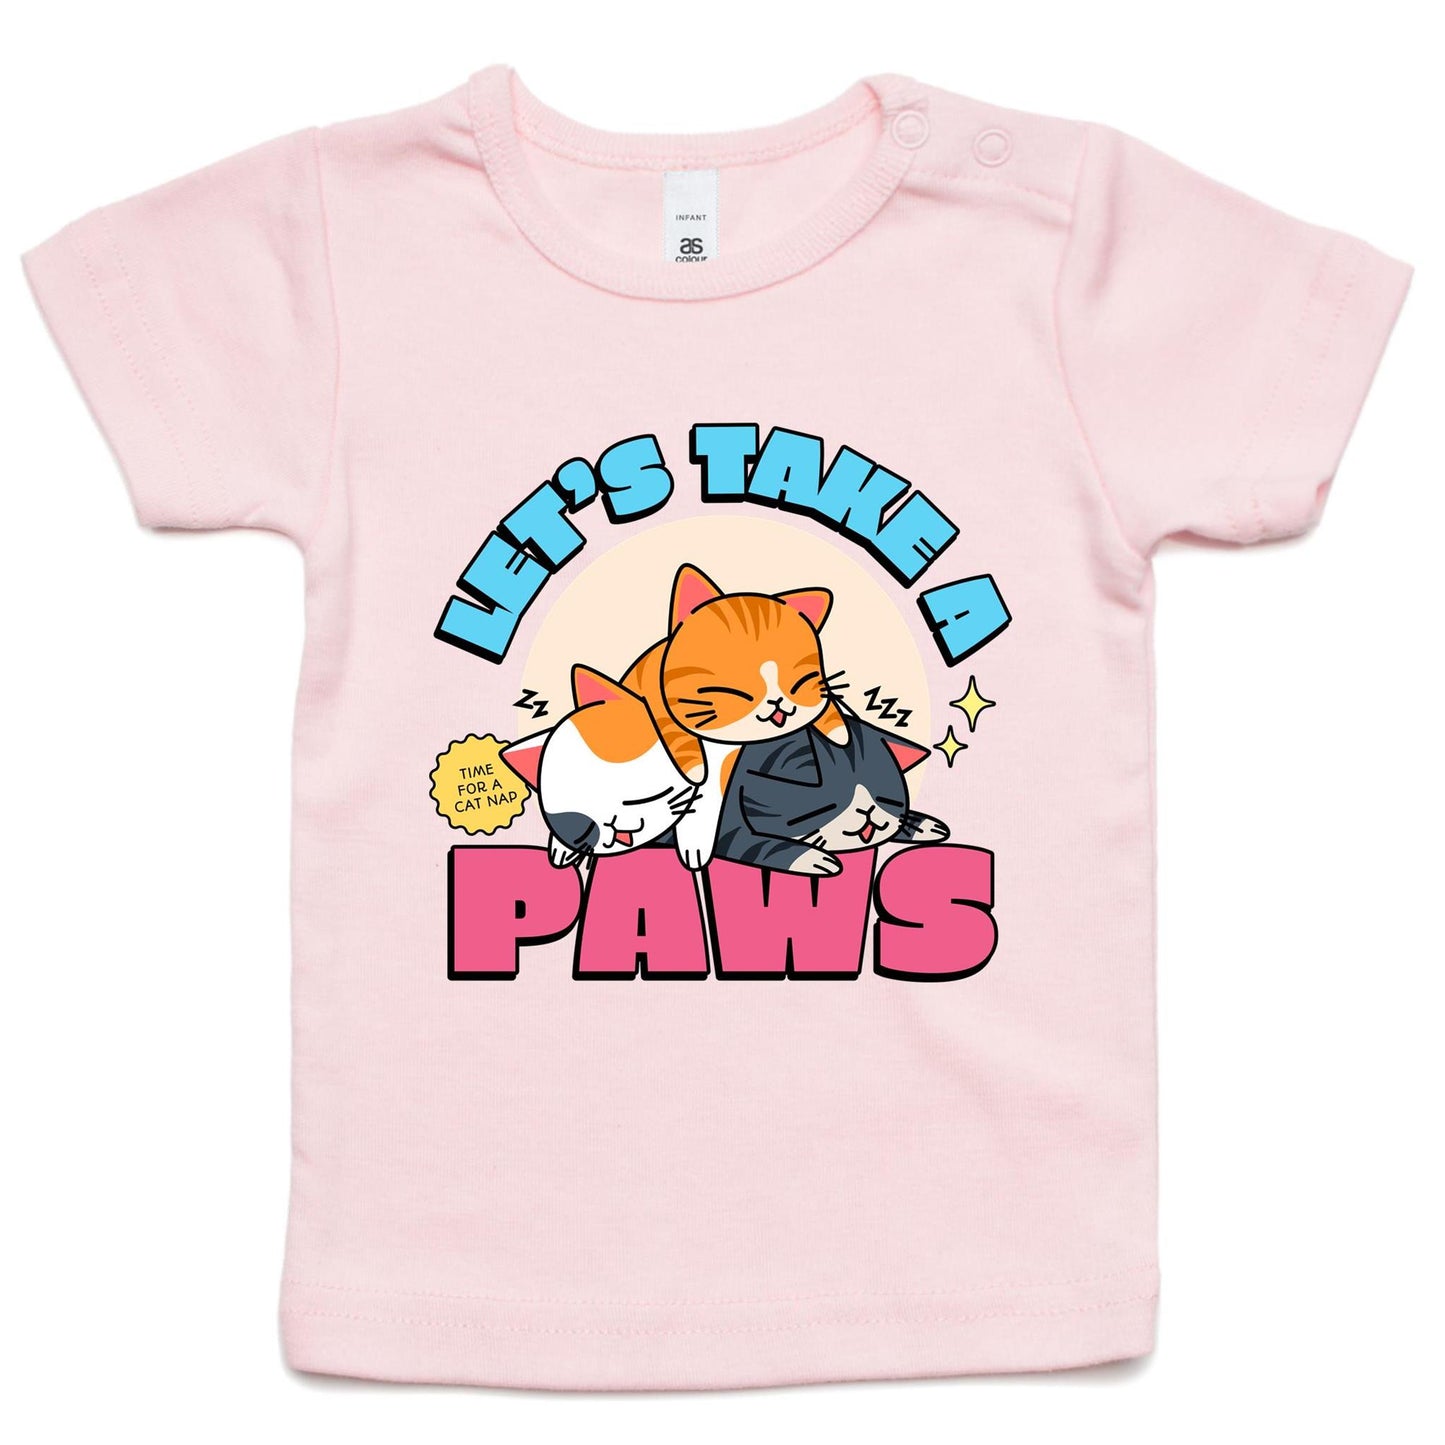 Let's Take A Paws, Time For A Cat Nap - Baby T-shirt Pink Baby T-shirt animal